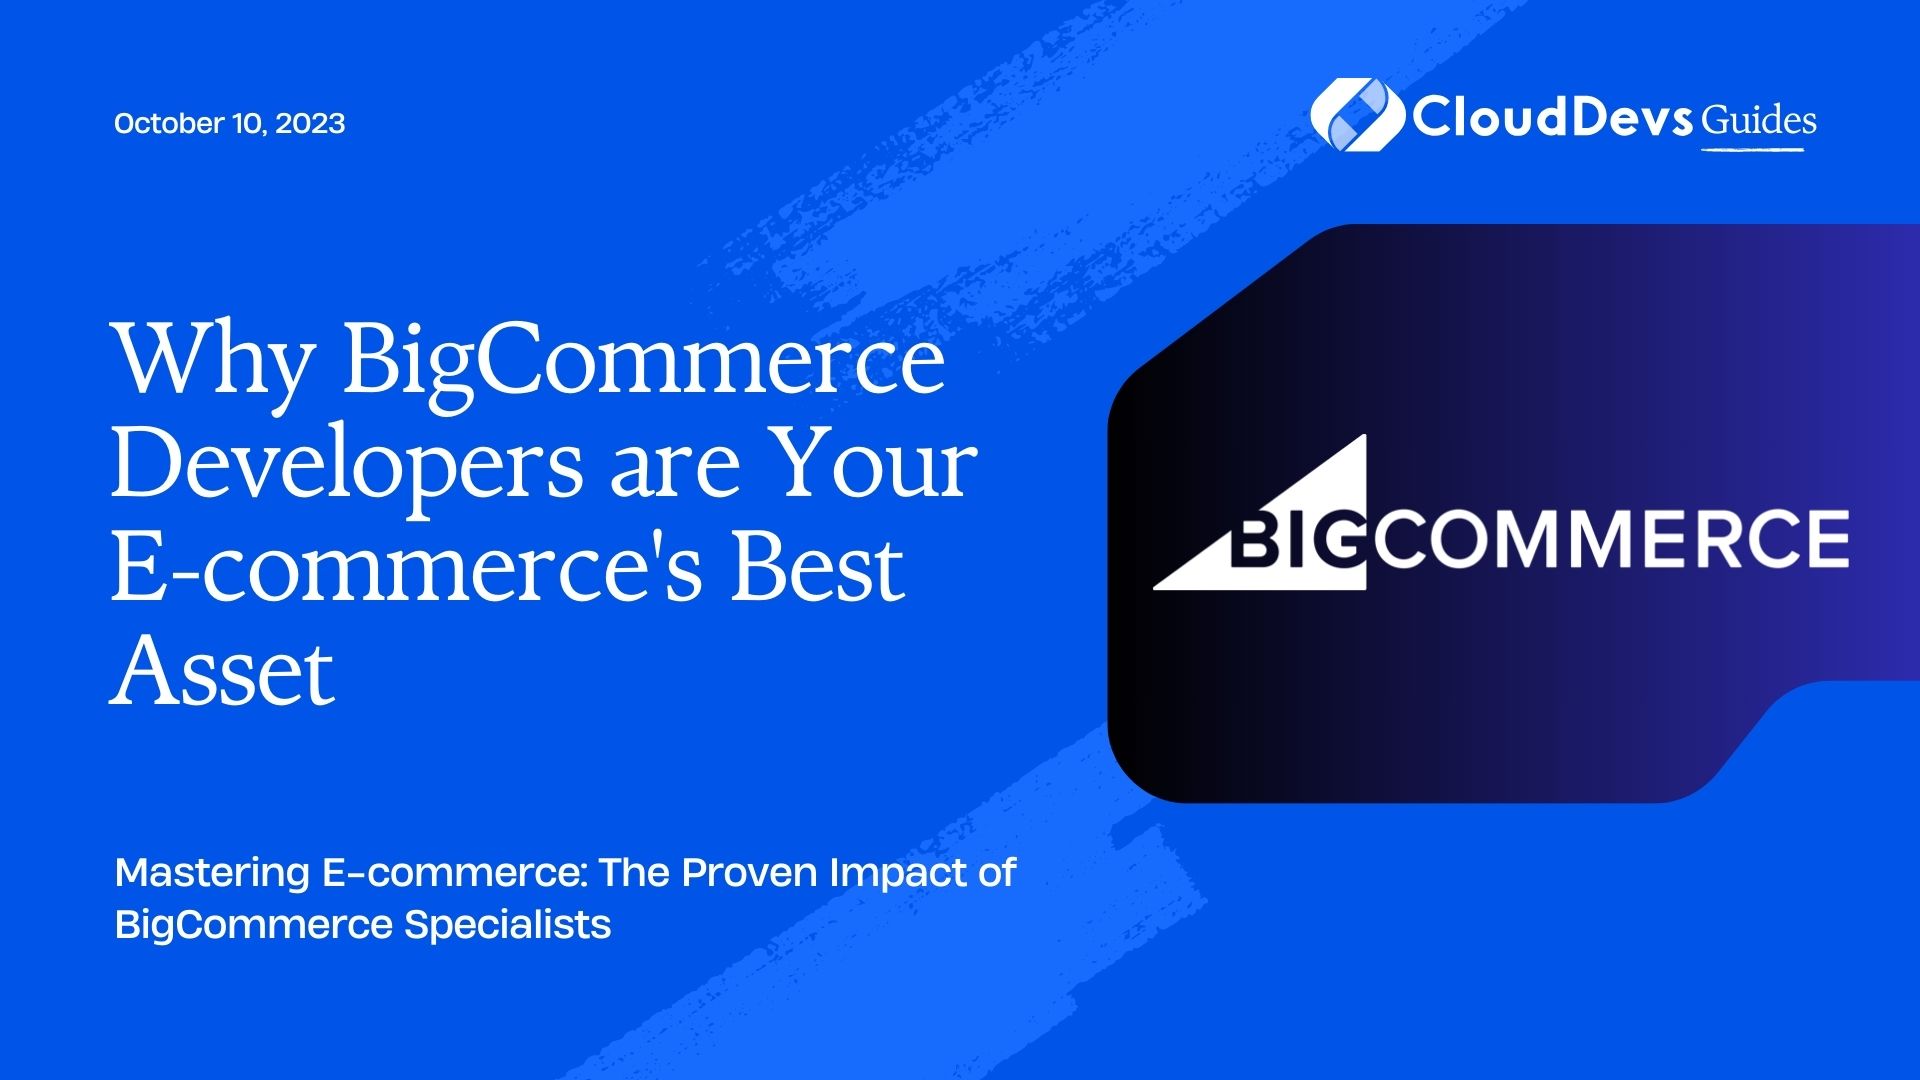 Why BigCommerce Developers are Your E-commerce's Best Asset